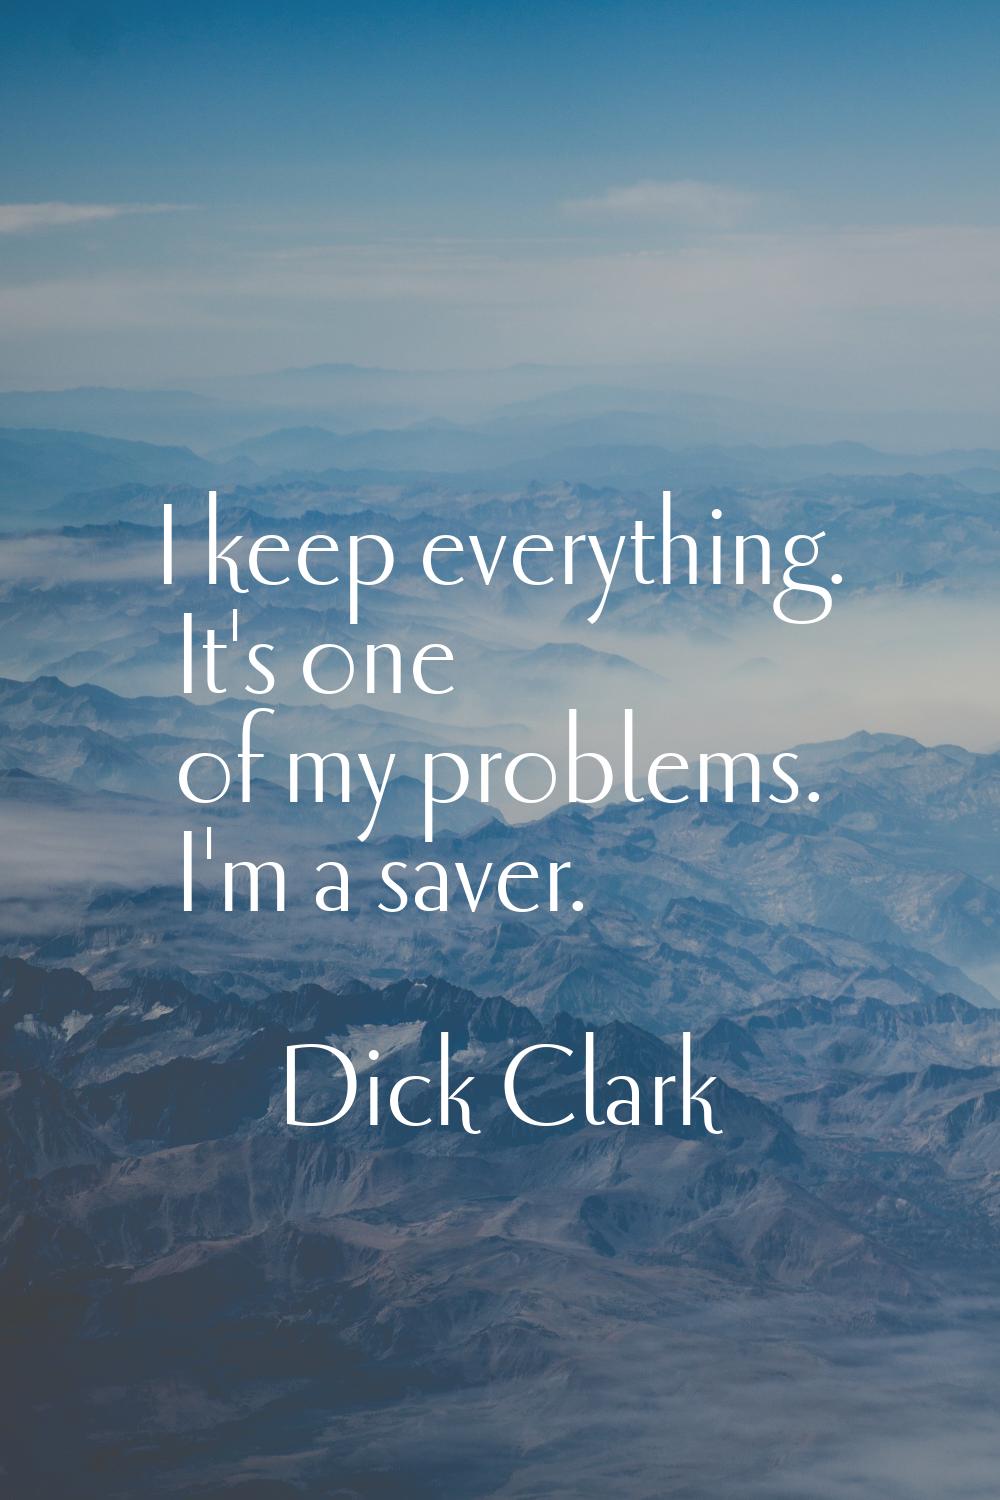 I keep everything. It's one of my problems. I'm a saver.